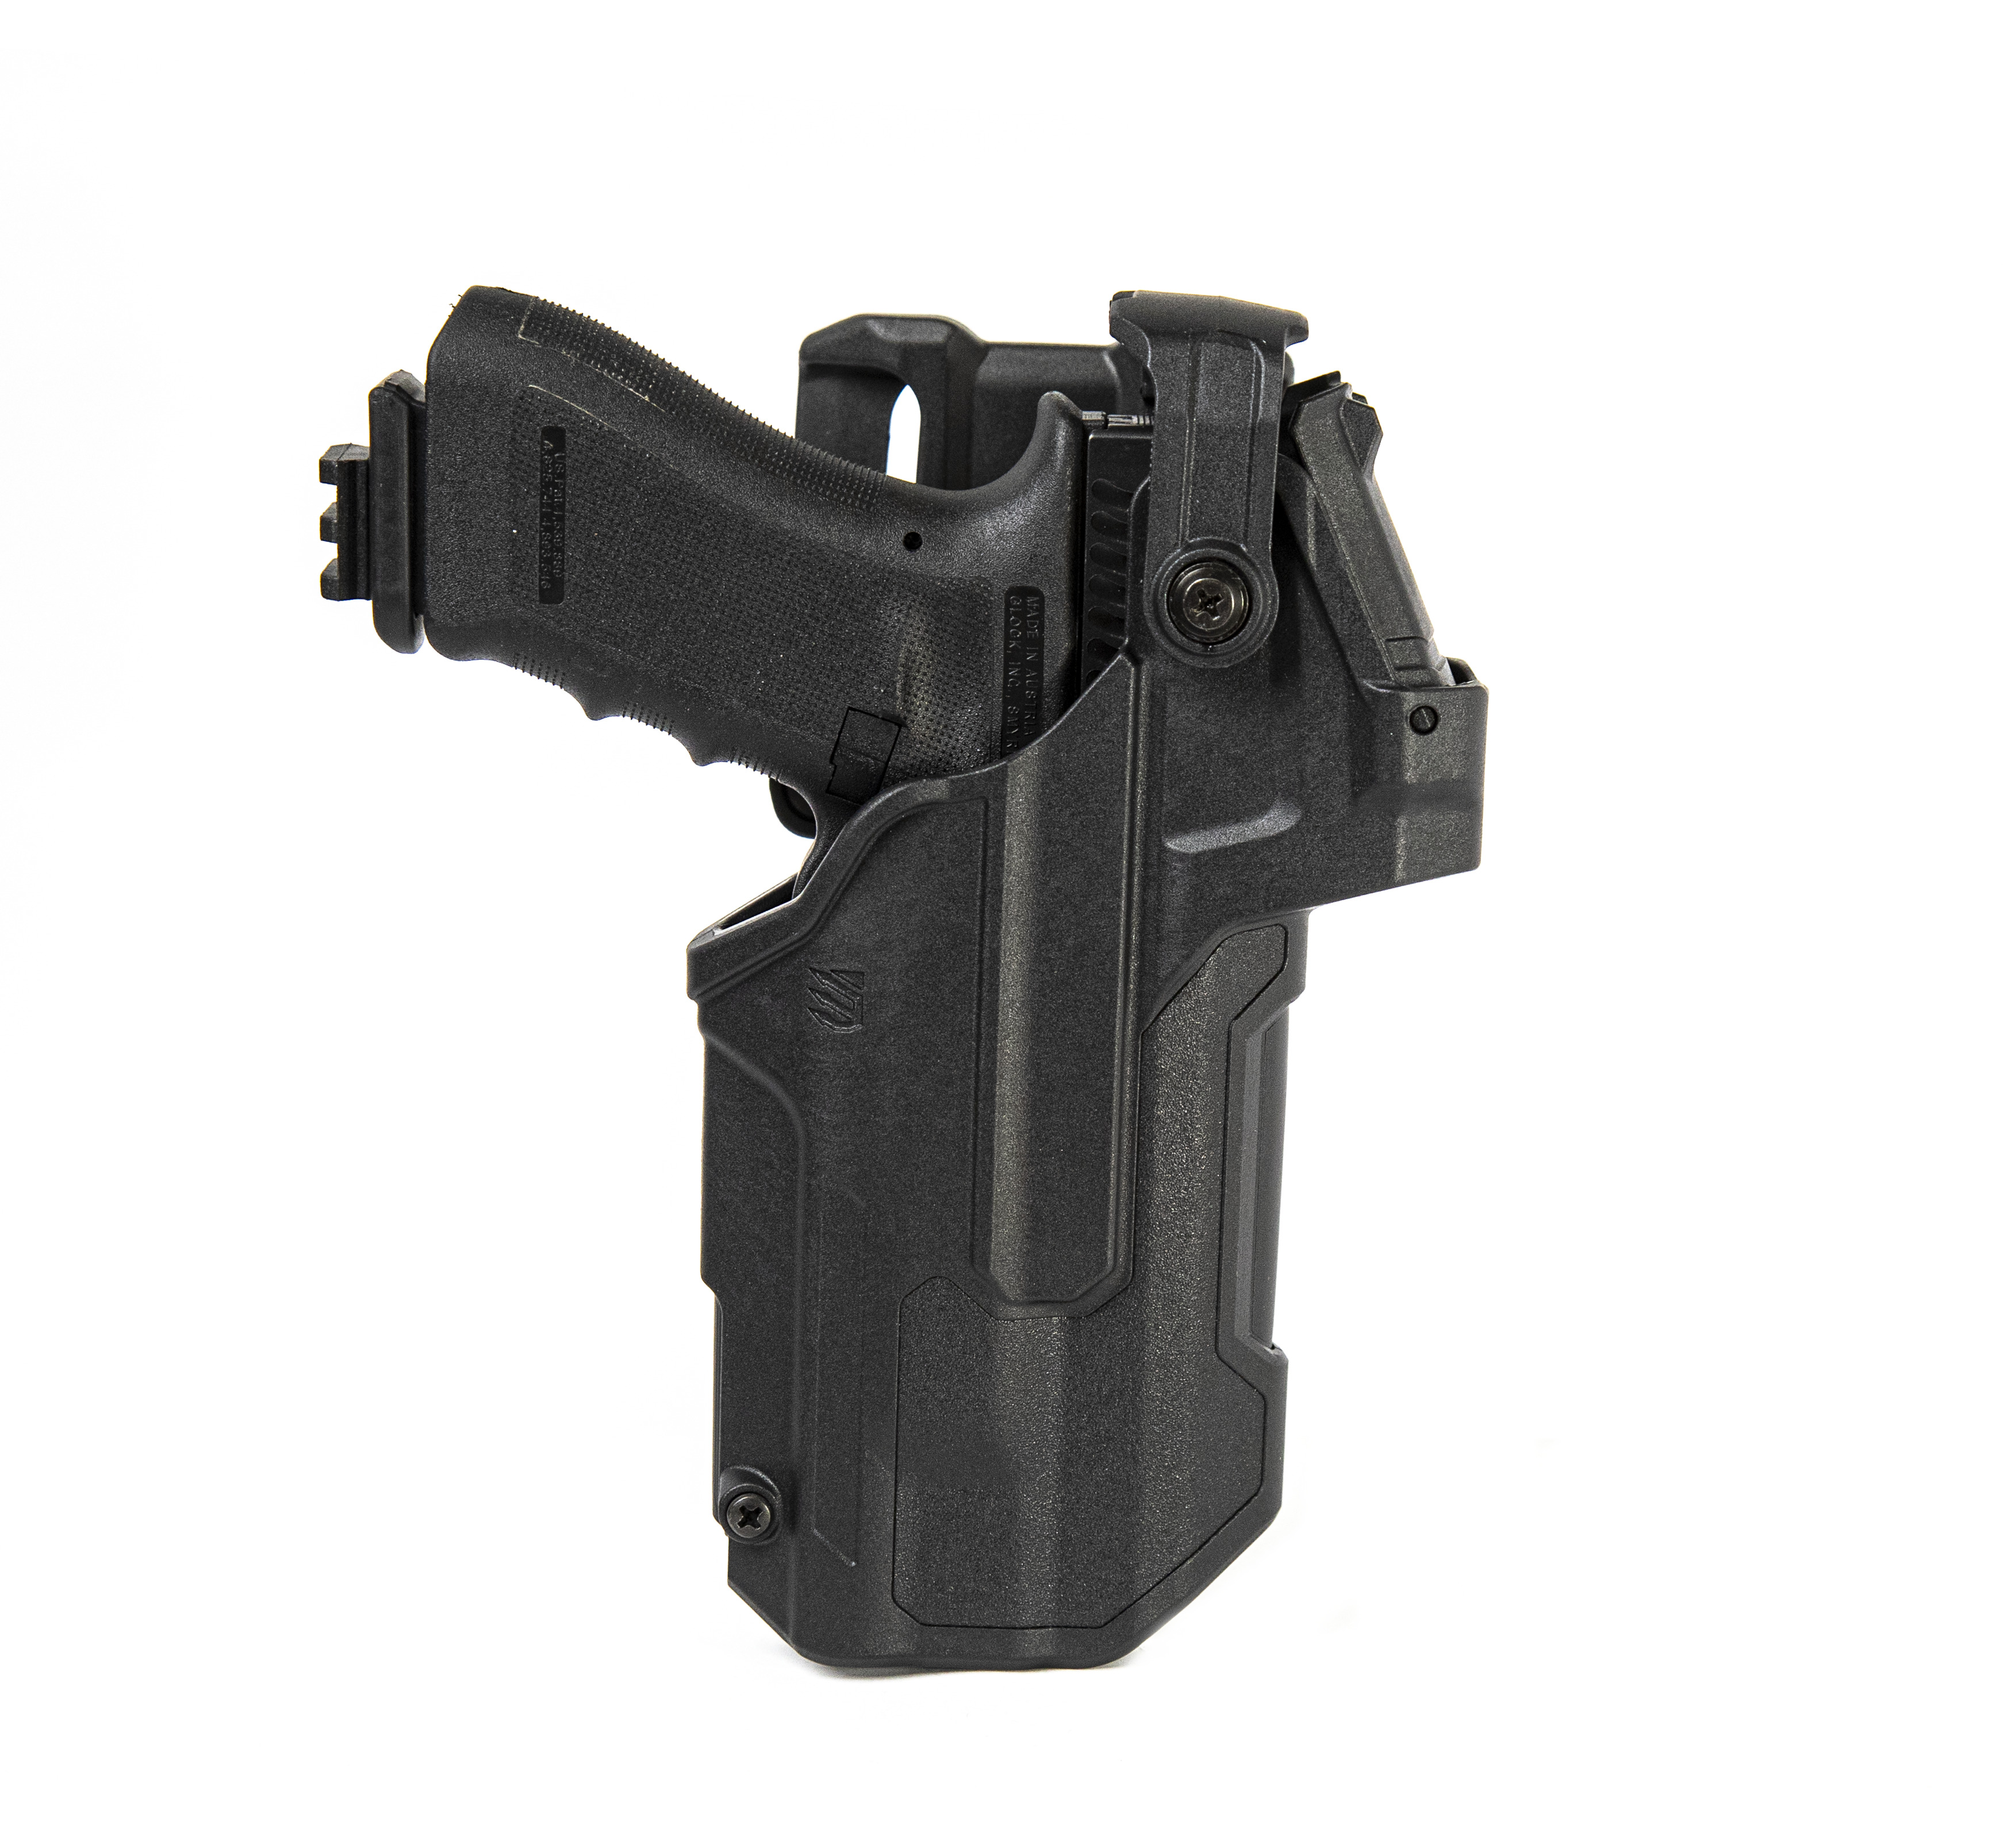 P320-M18 IWB BLACKPOINT TACTICAL LIGHT BEARING HOLSTER